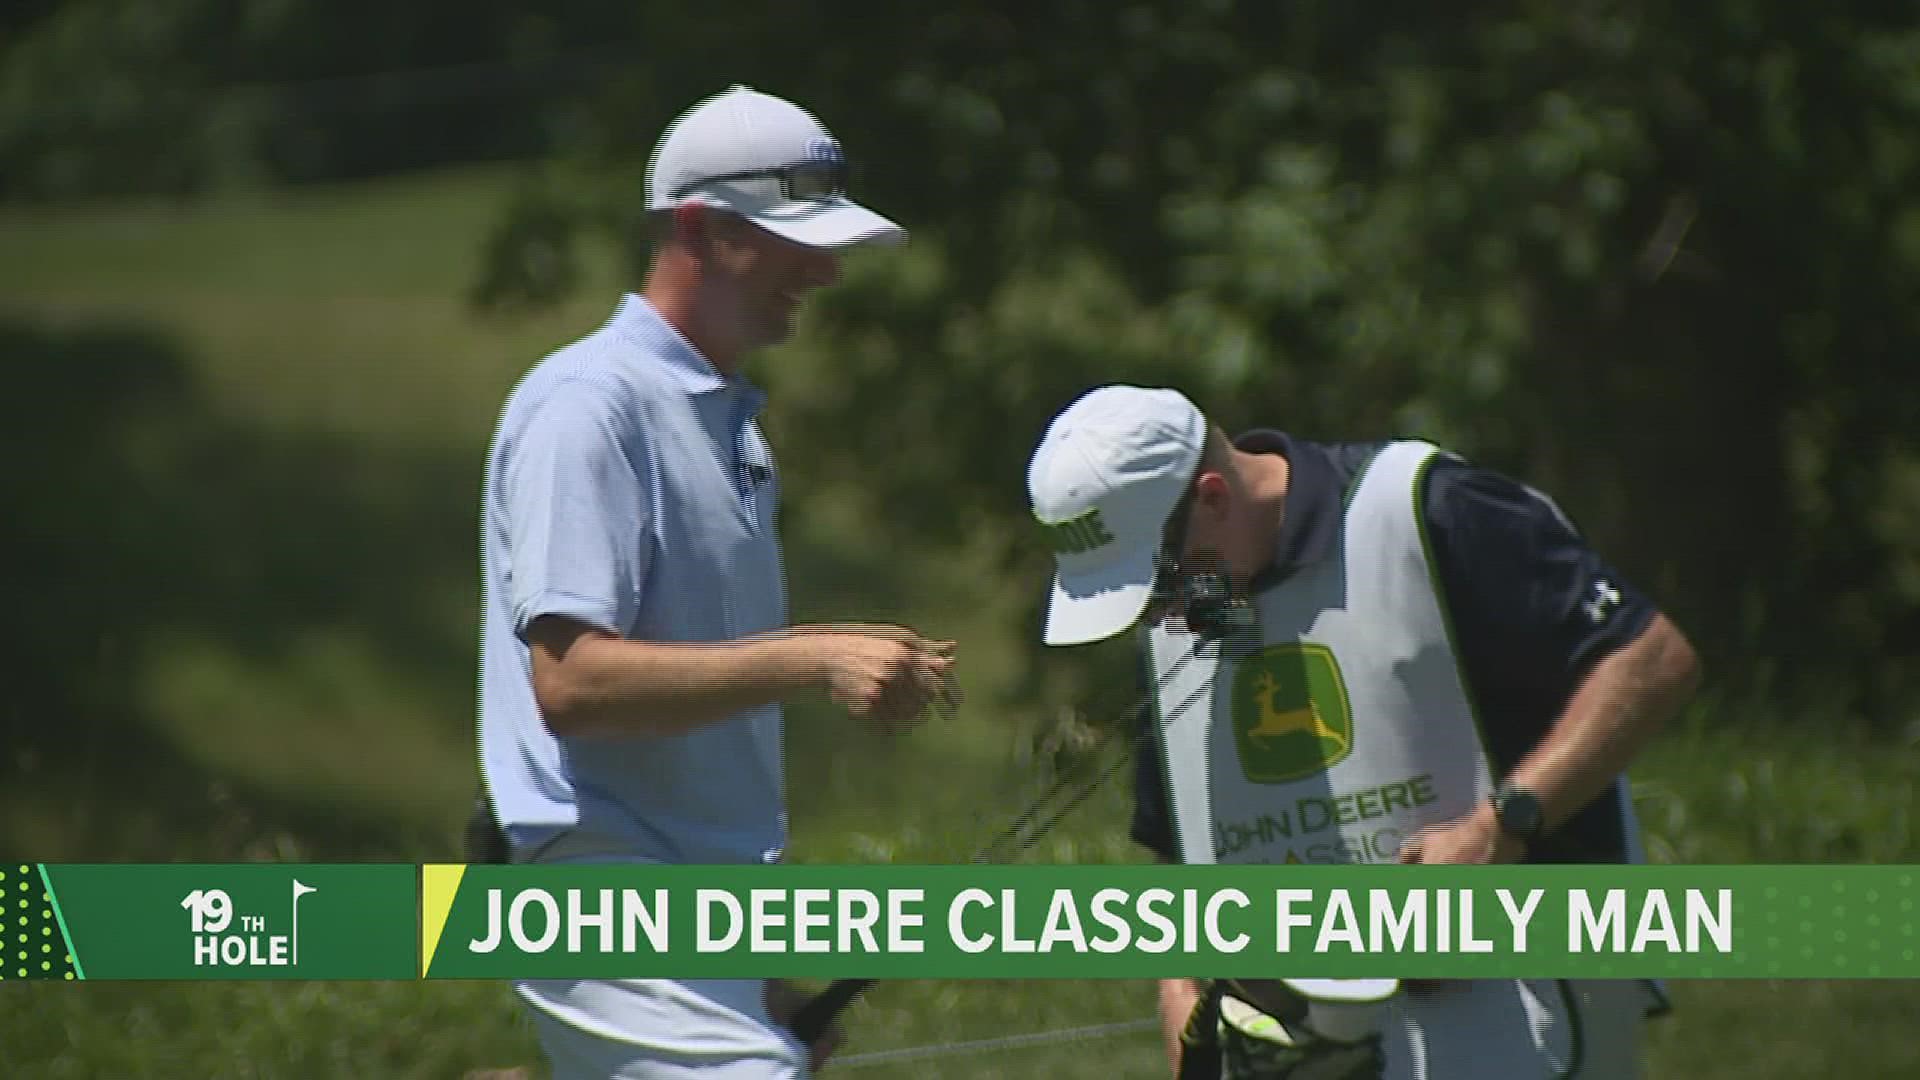 For Joel Oltman, family is the name of the game. During his pro-am round with a former JDC champion and the CEO of Deere & Company, all 8 of his kids cheered him on.